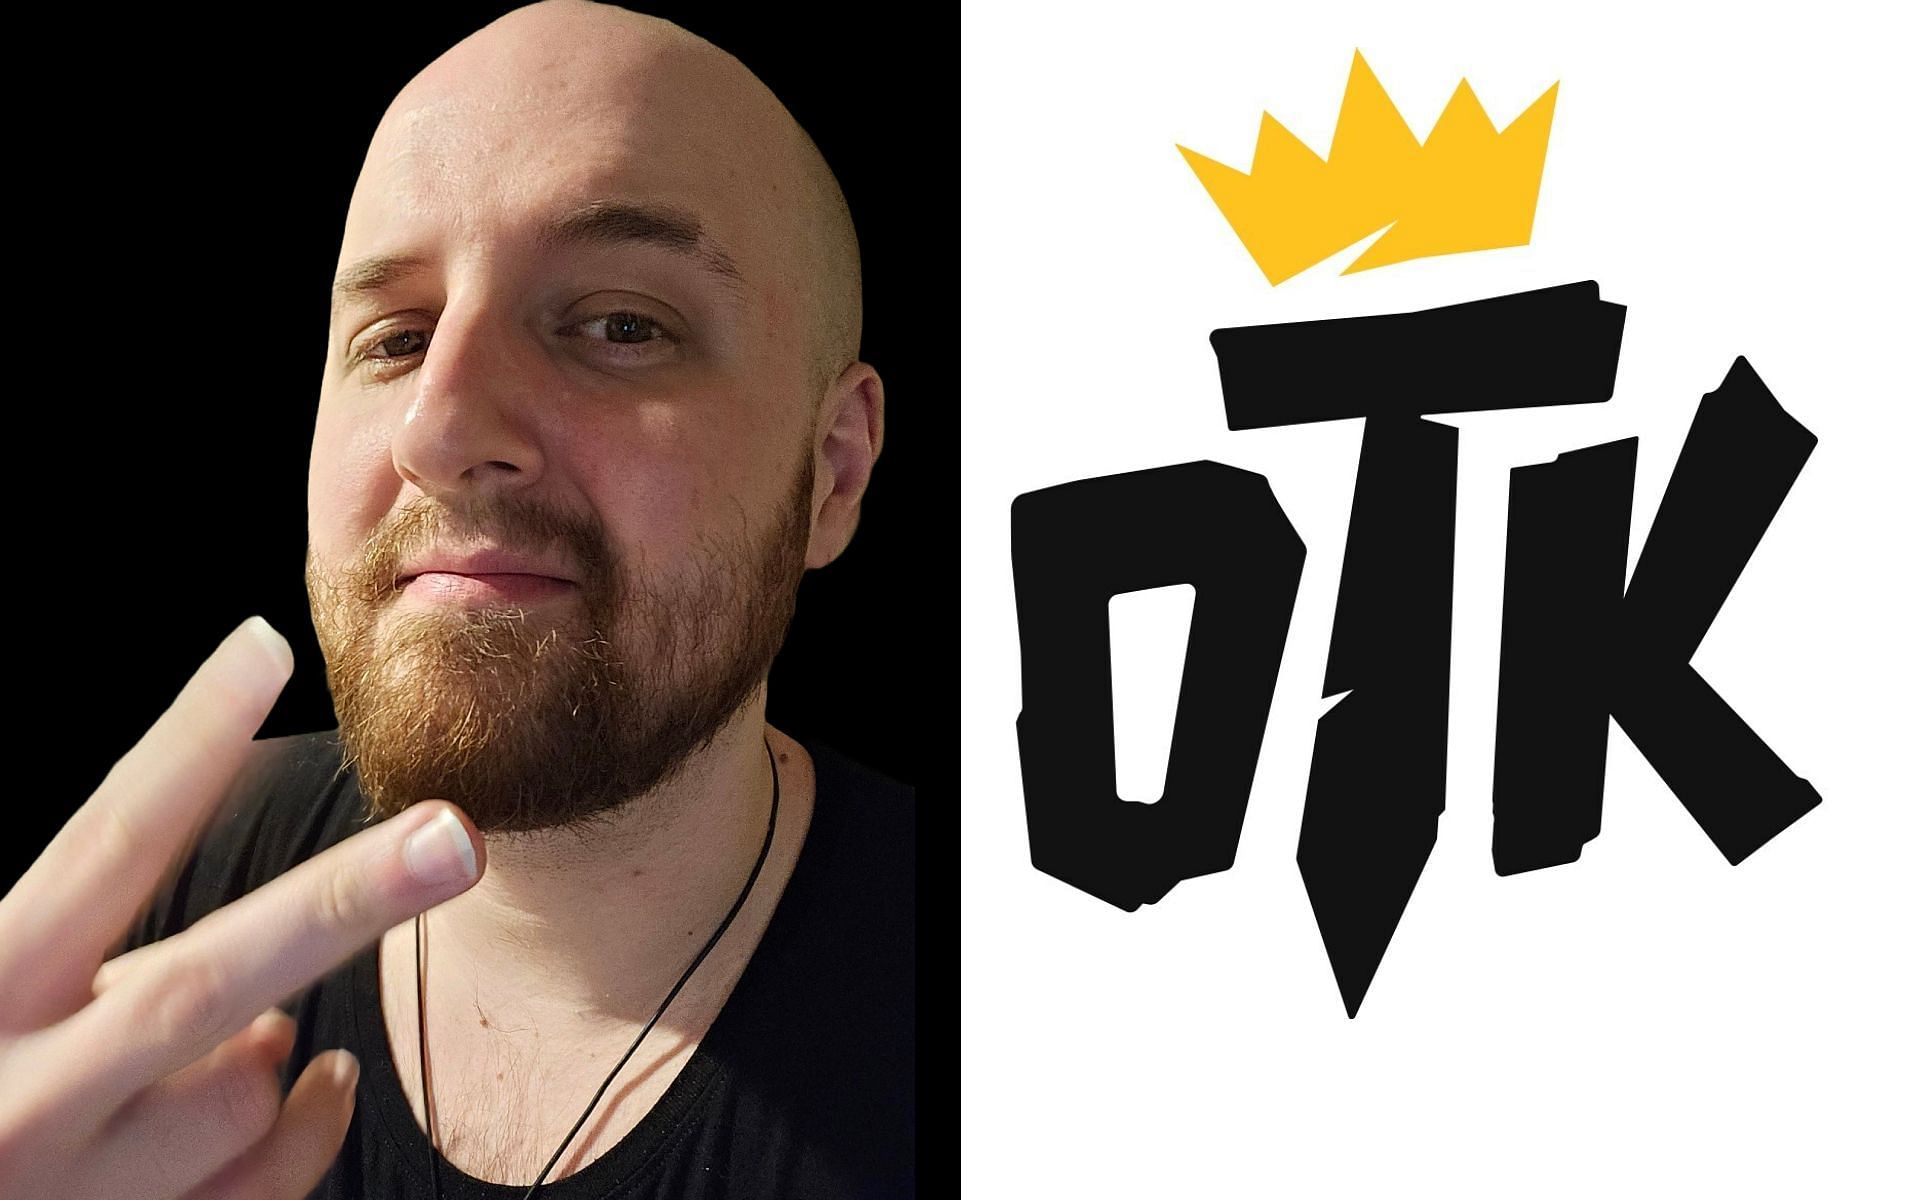 Twitch streamer Tectone claims joining OTK put him in debt (Image via Tectone/X and otknetwork.com)